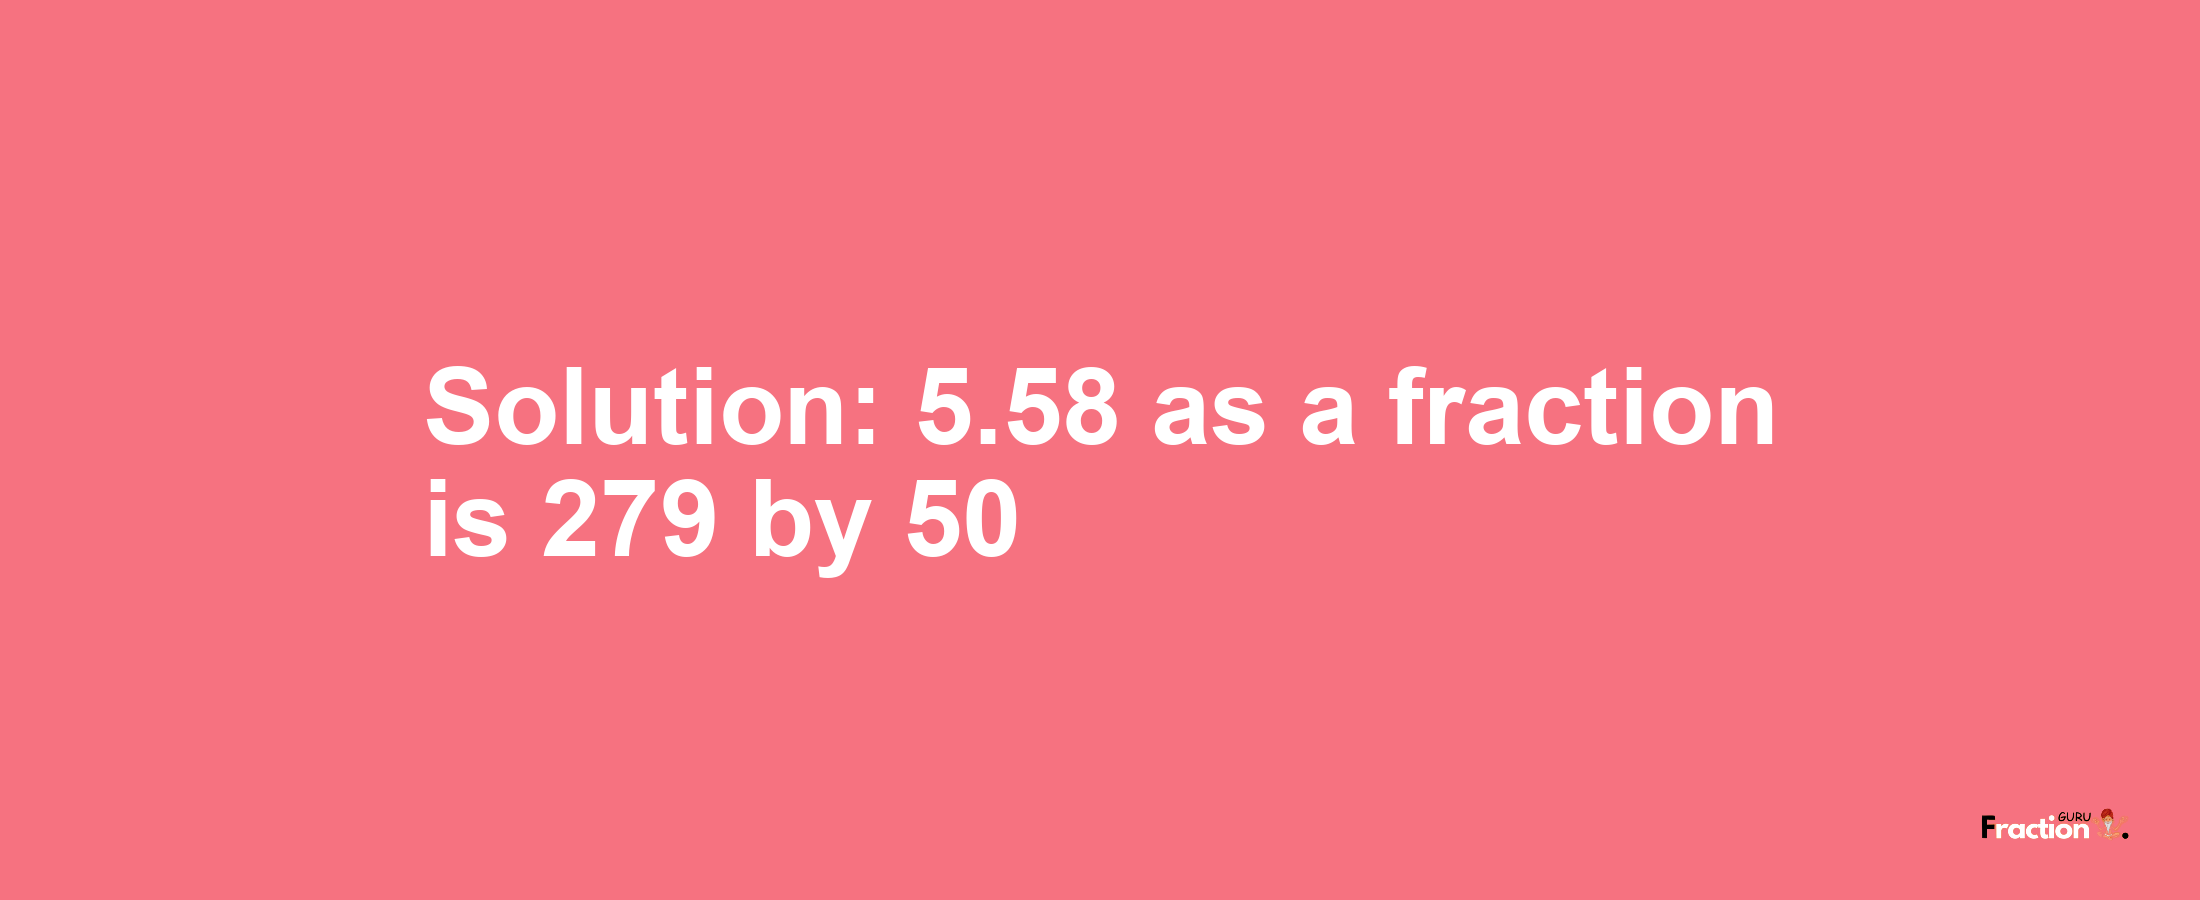 Solution:5.58 as a fraction is 279/50